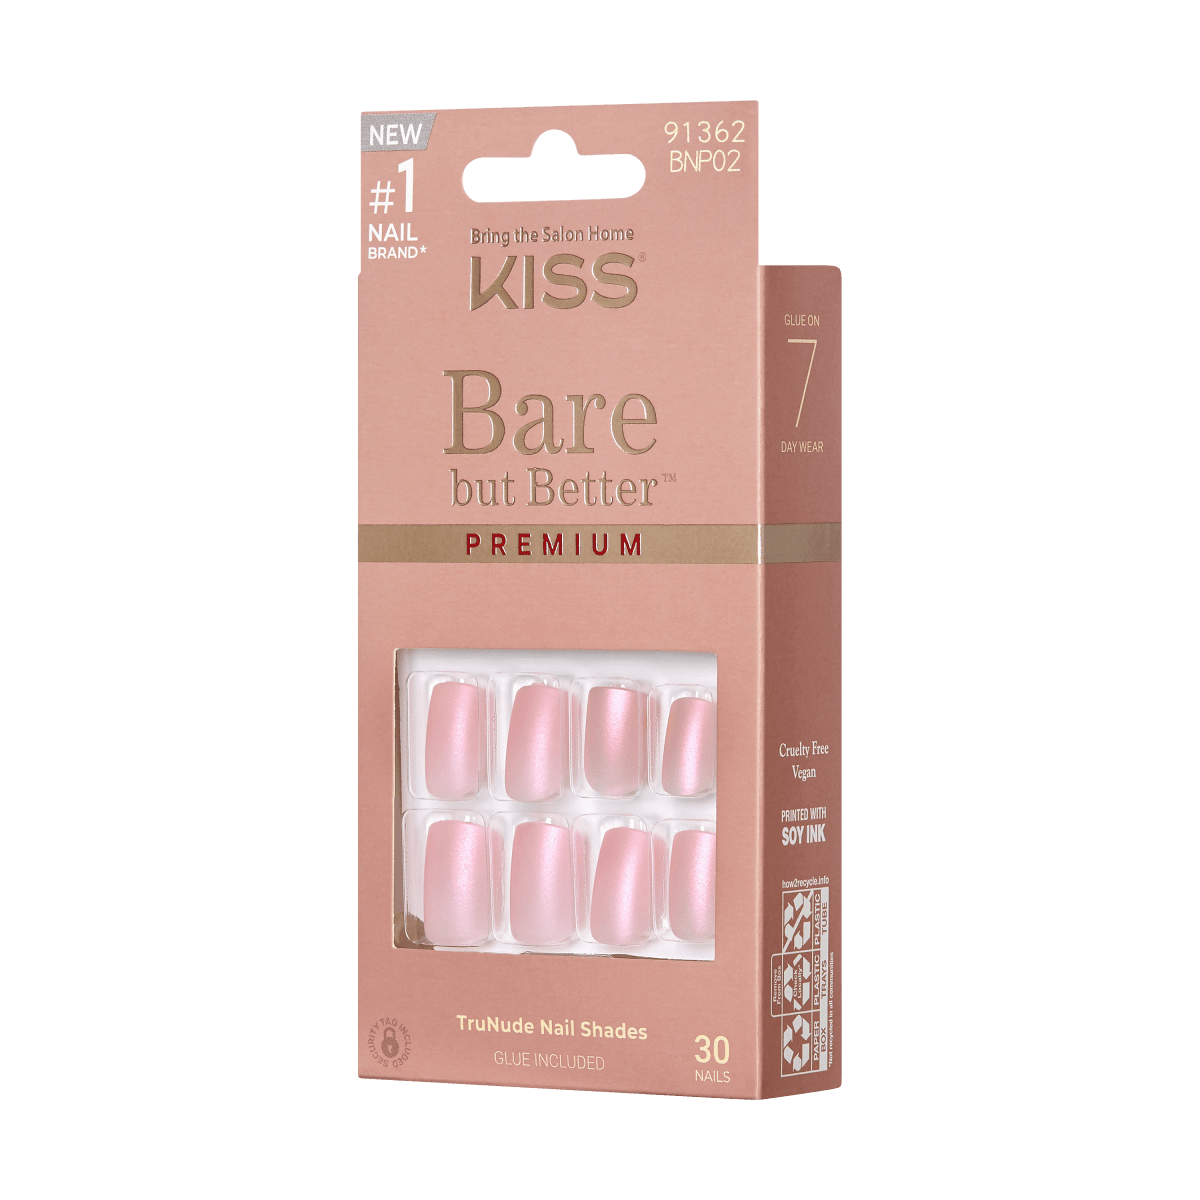 KISS Bare but Better Premium Press-On Nails, ‘Spicy’, Pink, Short ...